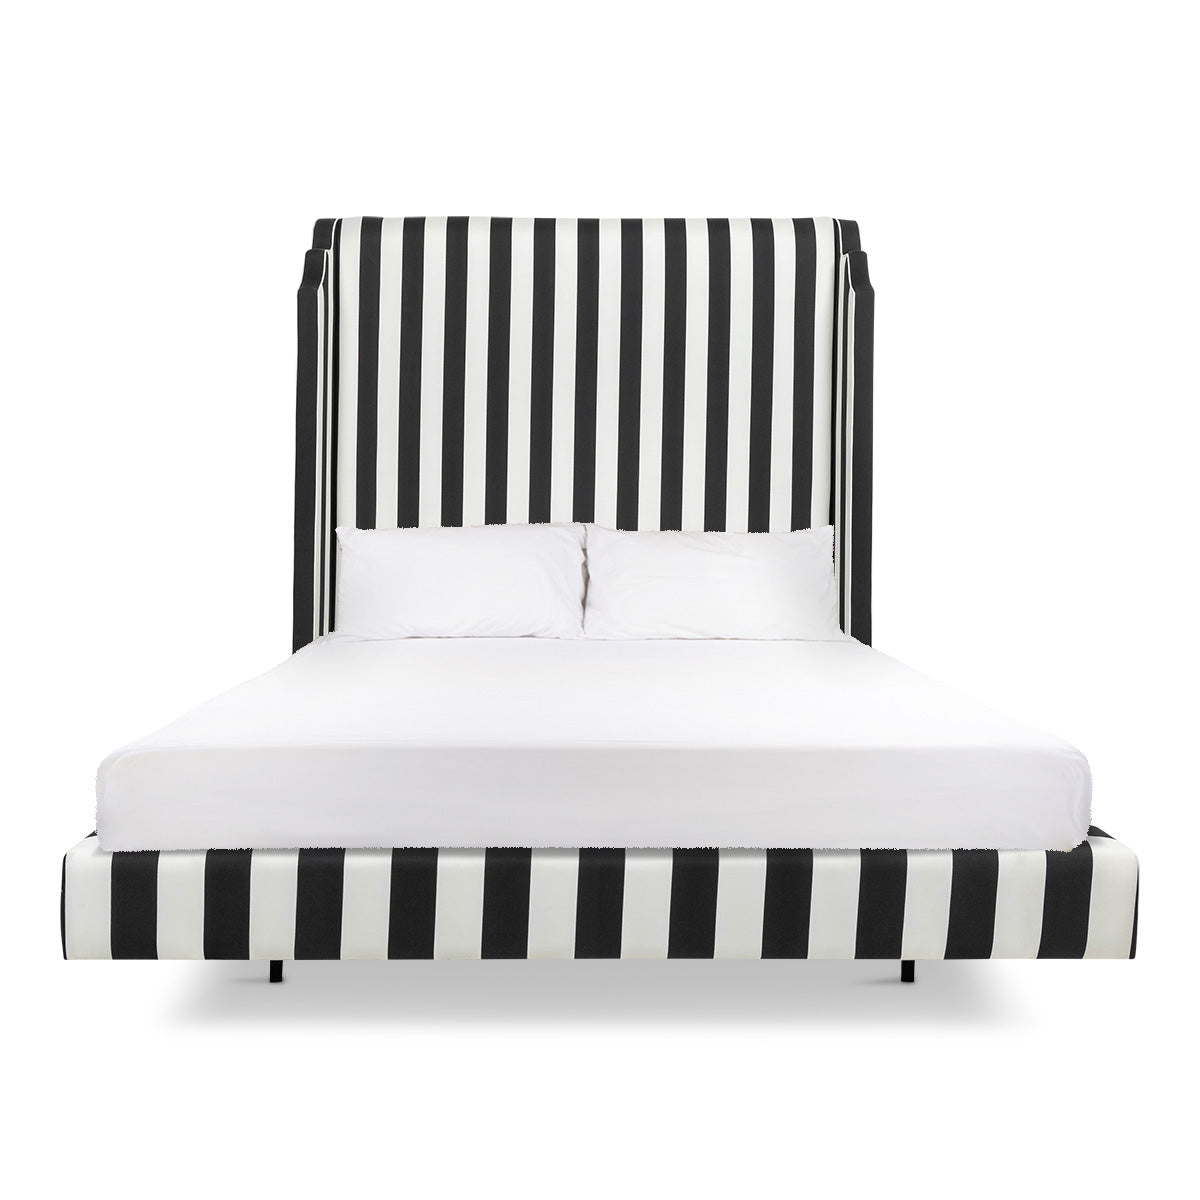 Tiffany Bed in Black and White Stripe Linen